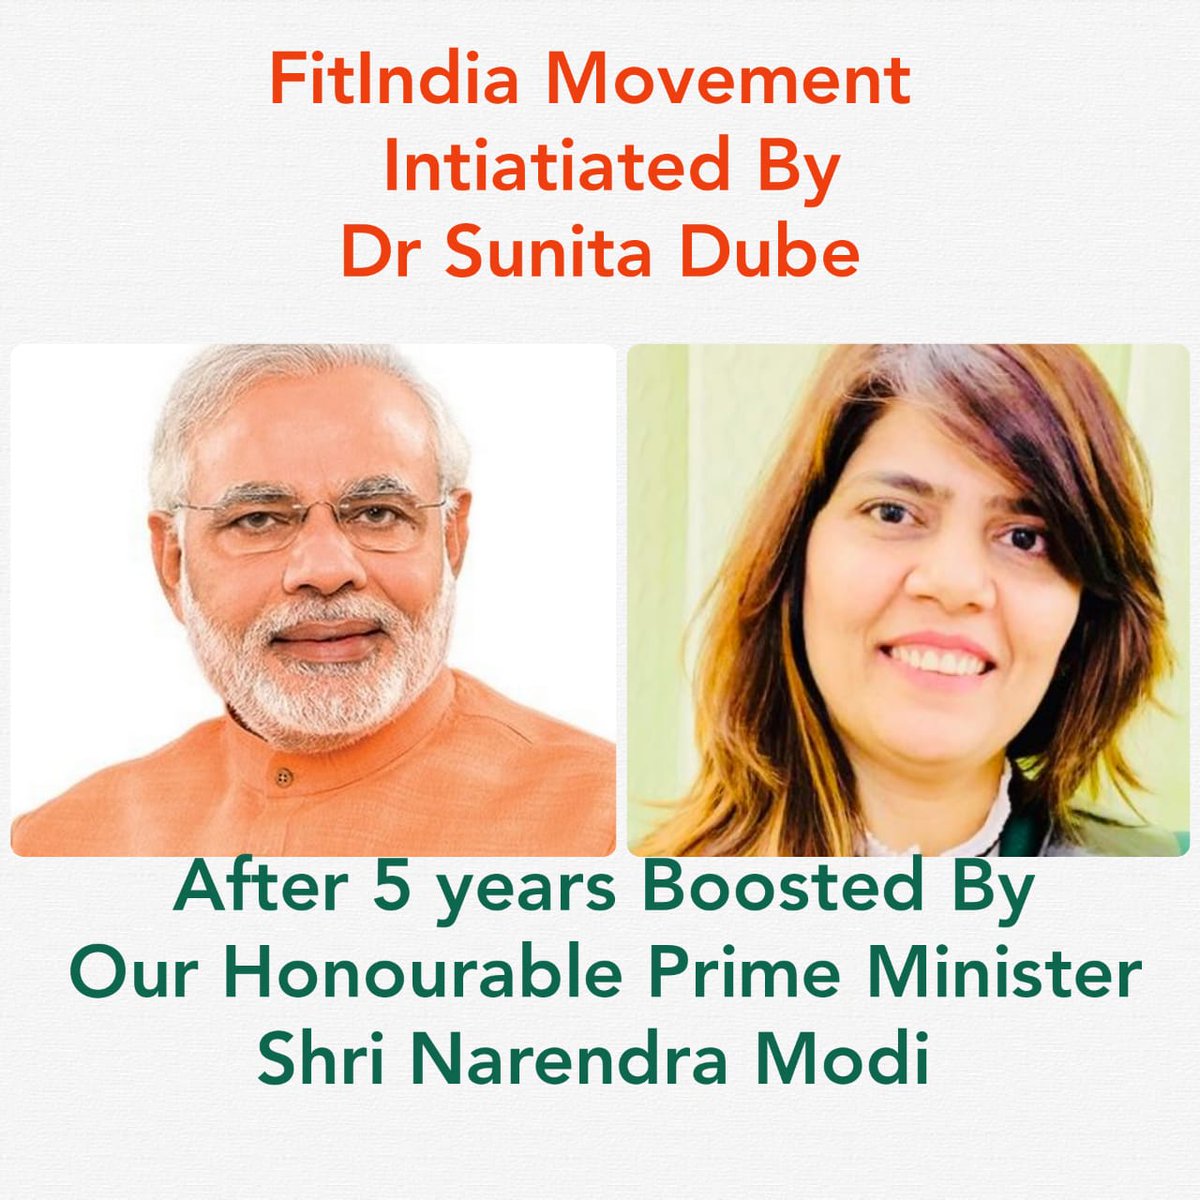 5 year completion of FitIndia Movement by medscape doctor and our honoble prime minister gave the campaign deserve applause 
#FitIndiMovement
#MedscapeIndia